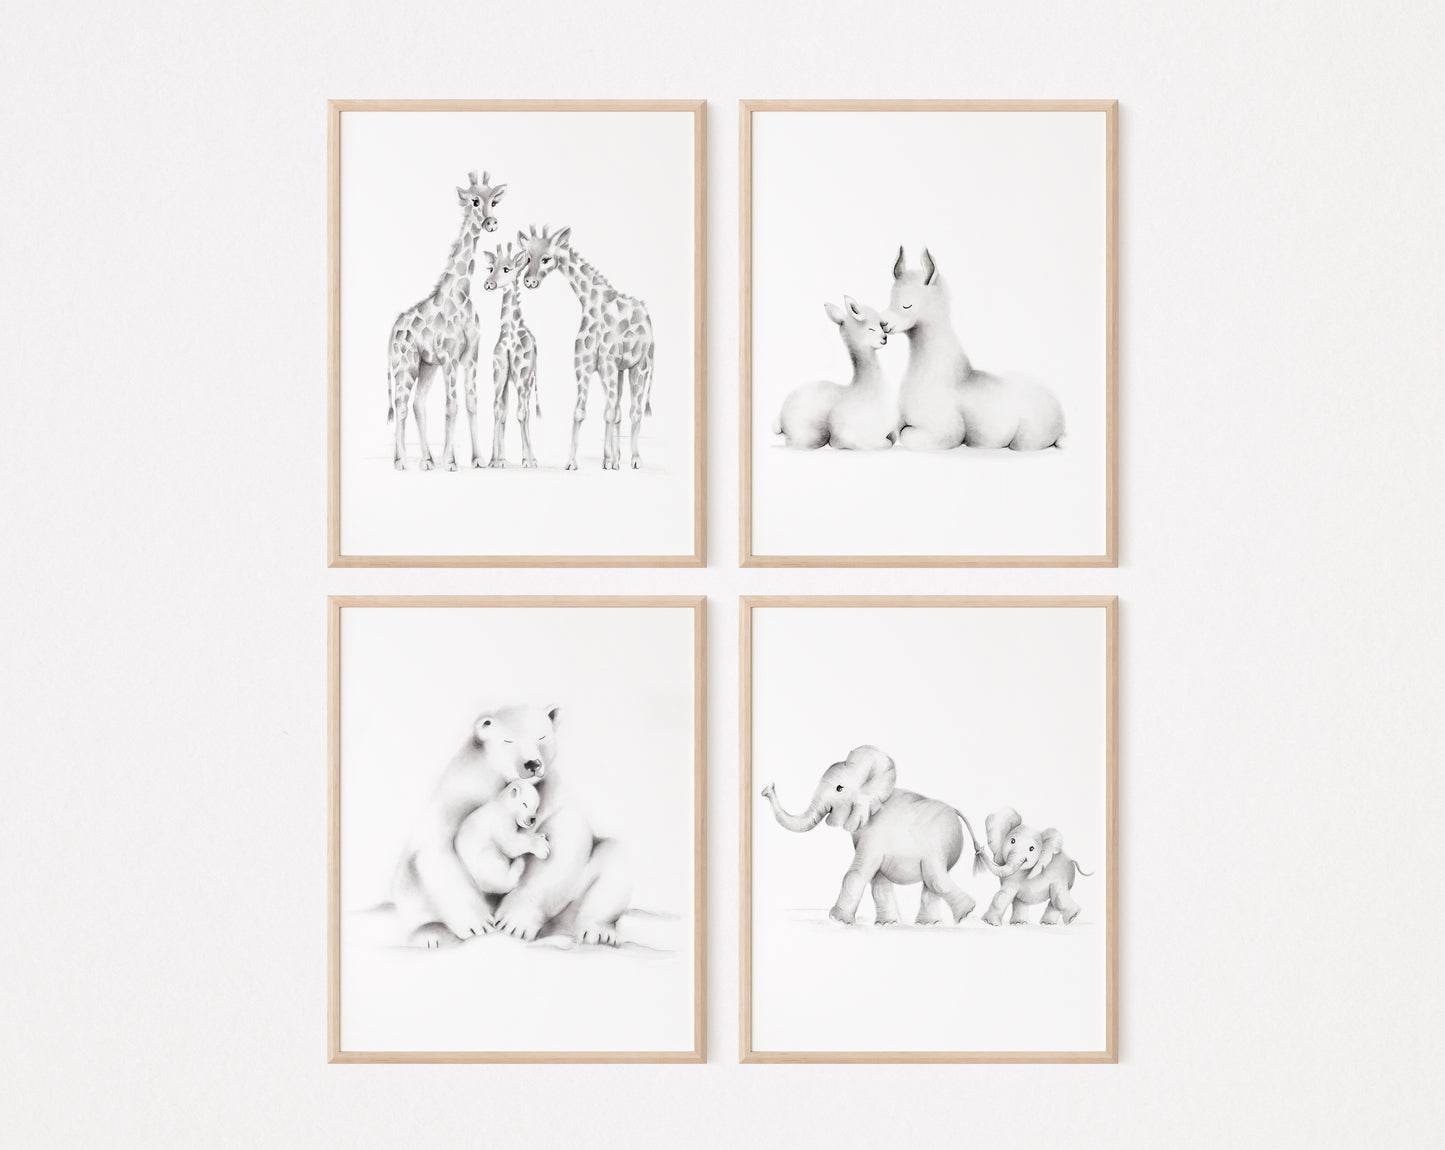 Set of 4 baby animal family drawings for a baby's nursery. The images include a giraffe family and a mother and baby llama, polar bear and elephants. Prints are shown in wood frames hanging on a plain white background wall - Studio Q - Art by Nicky Quartermaine Scott